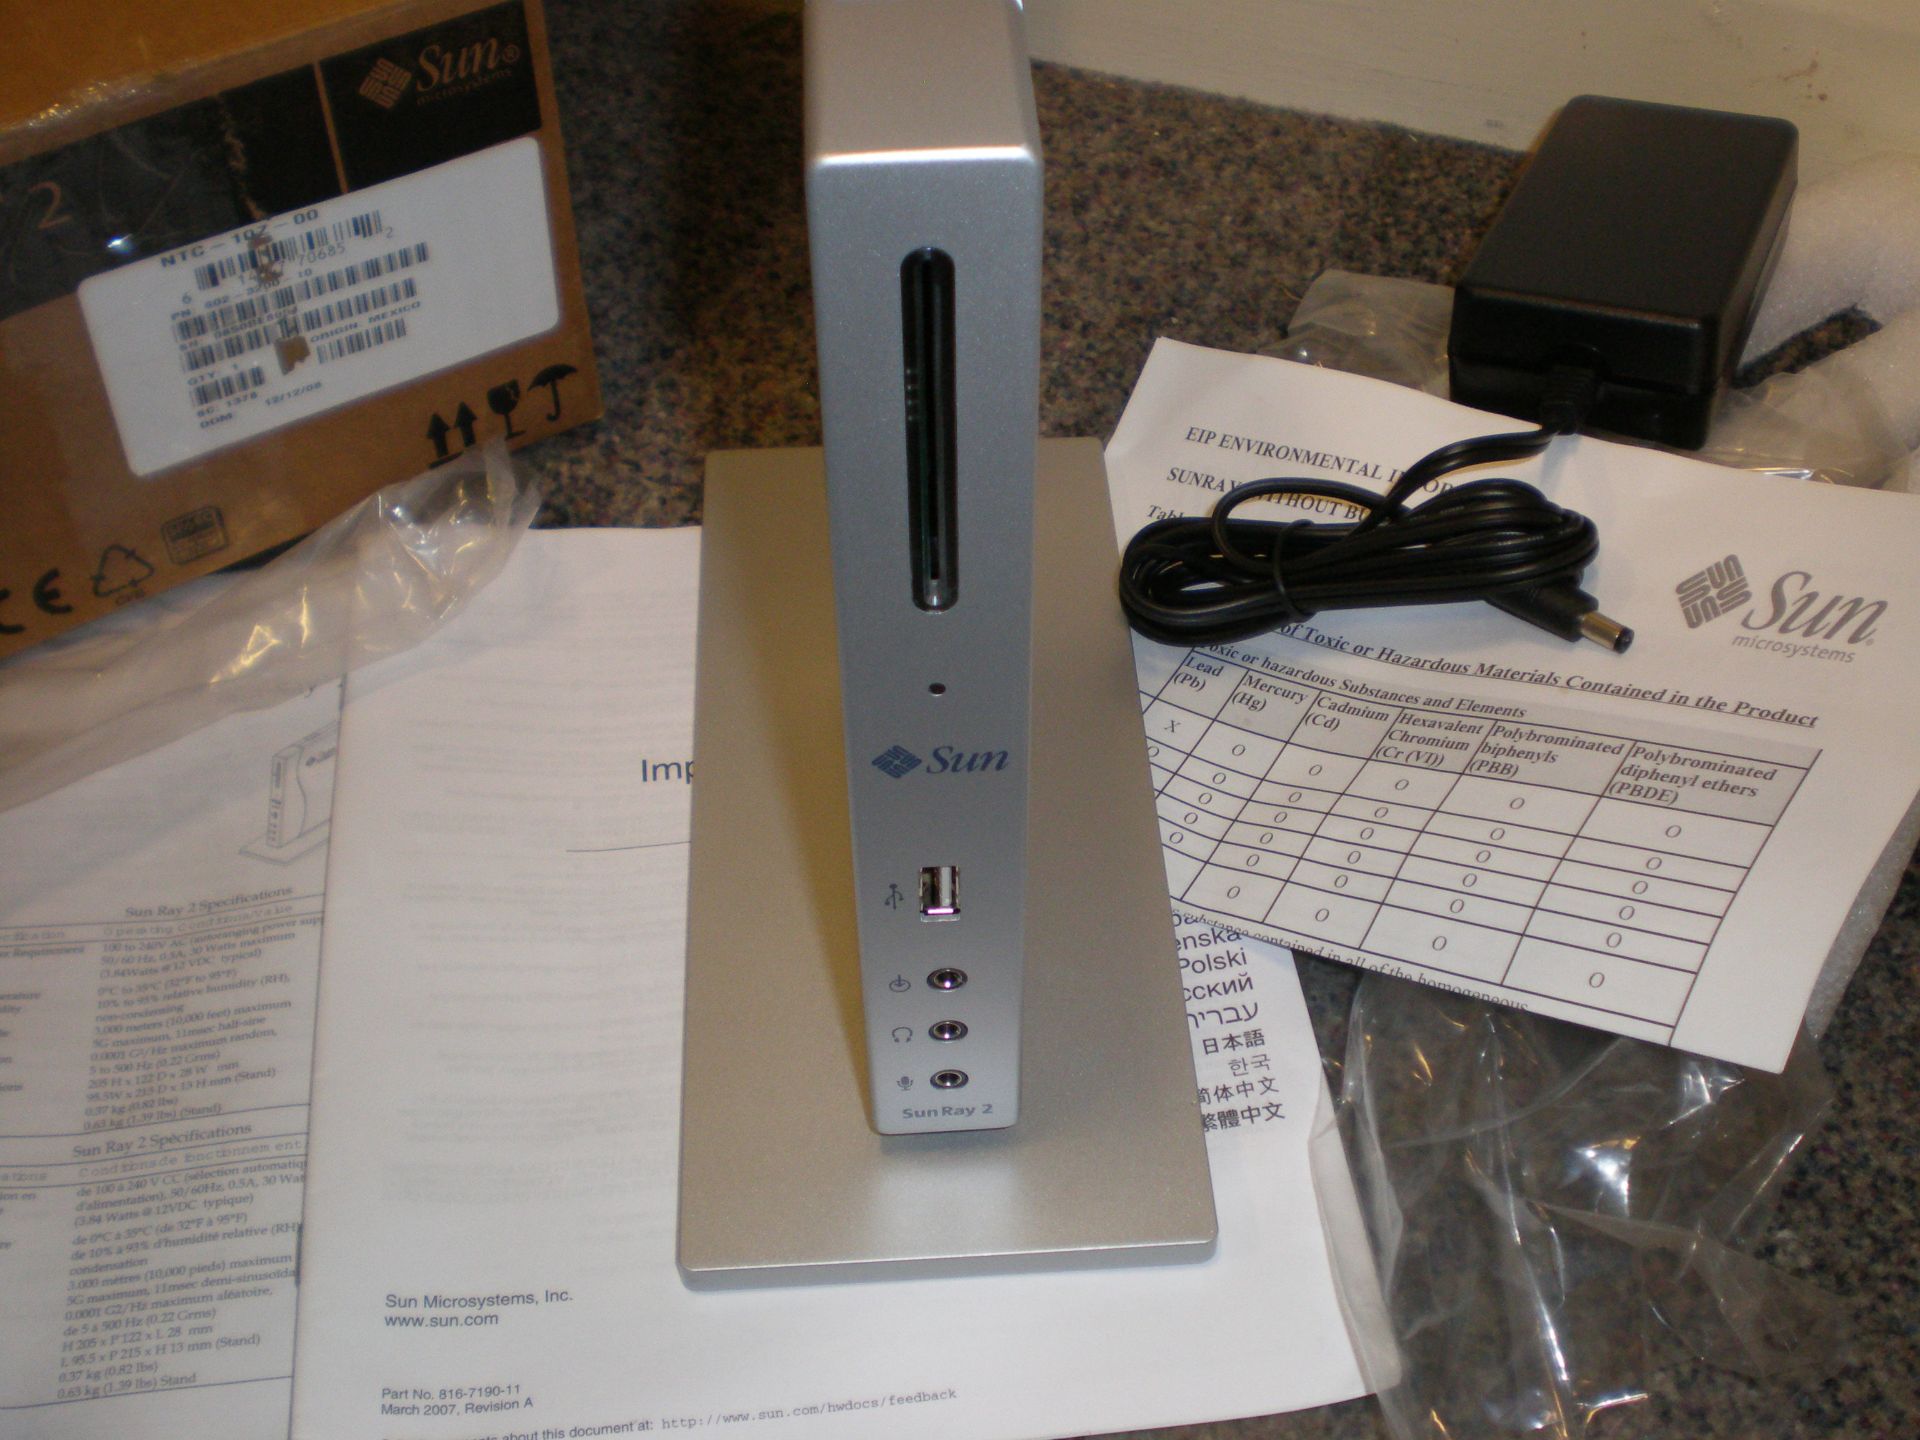 Brand New Sun Ray 2 Thin Client Computer Desktop System (No Packaging Thin Client Only)